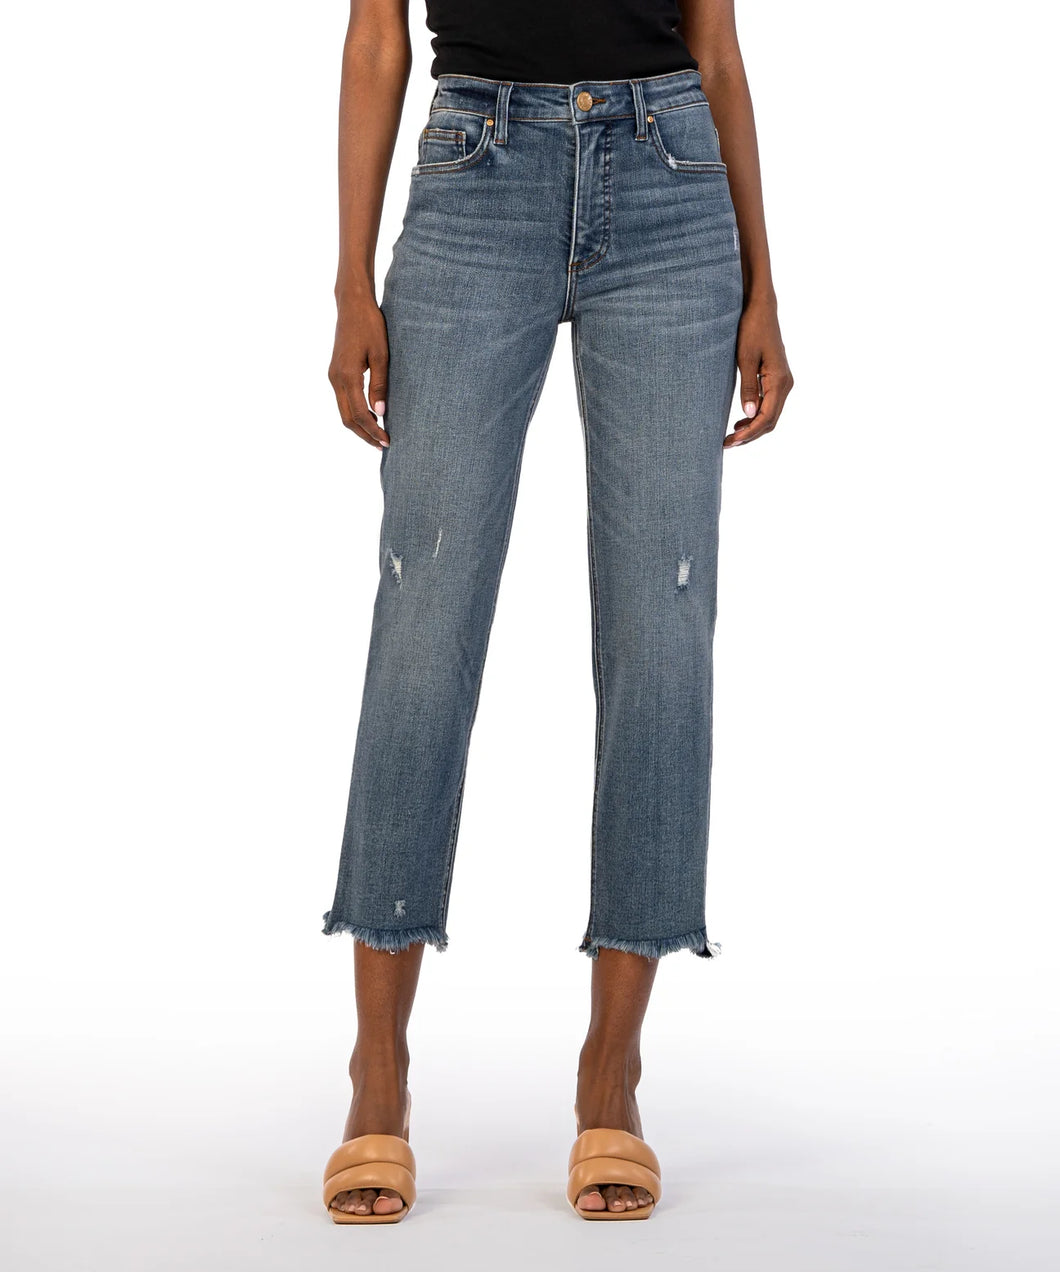 Kut: Rachael High Rise Fab Ab Mom Fray Jeans in Built KP1693MA5